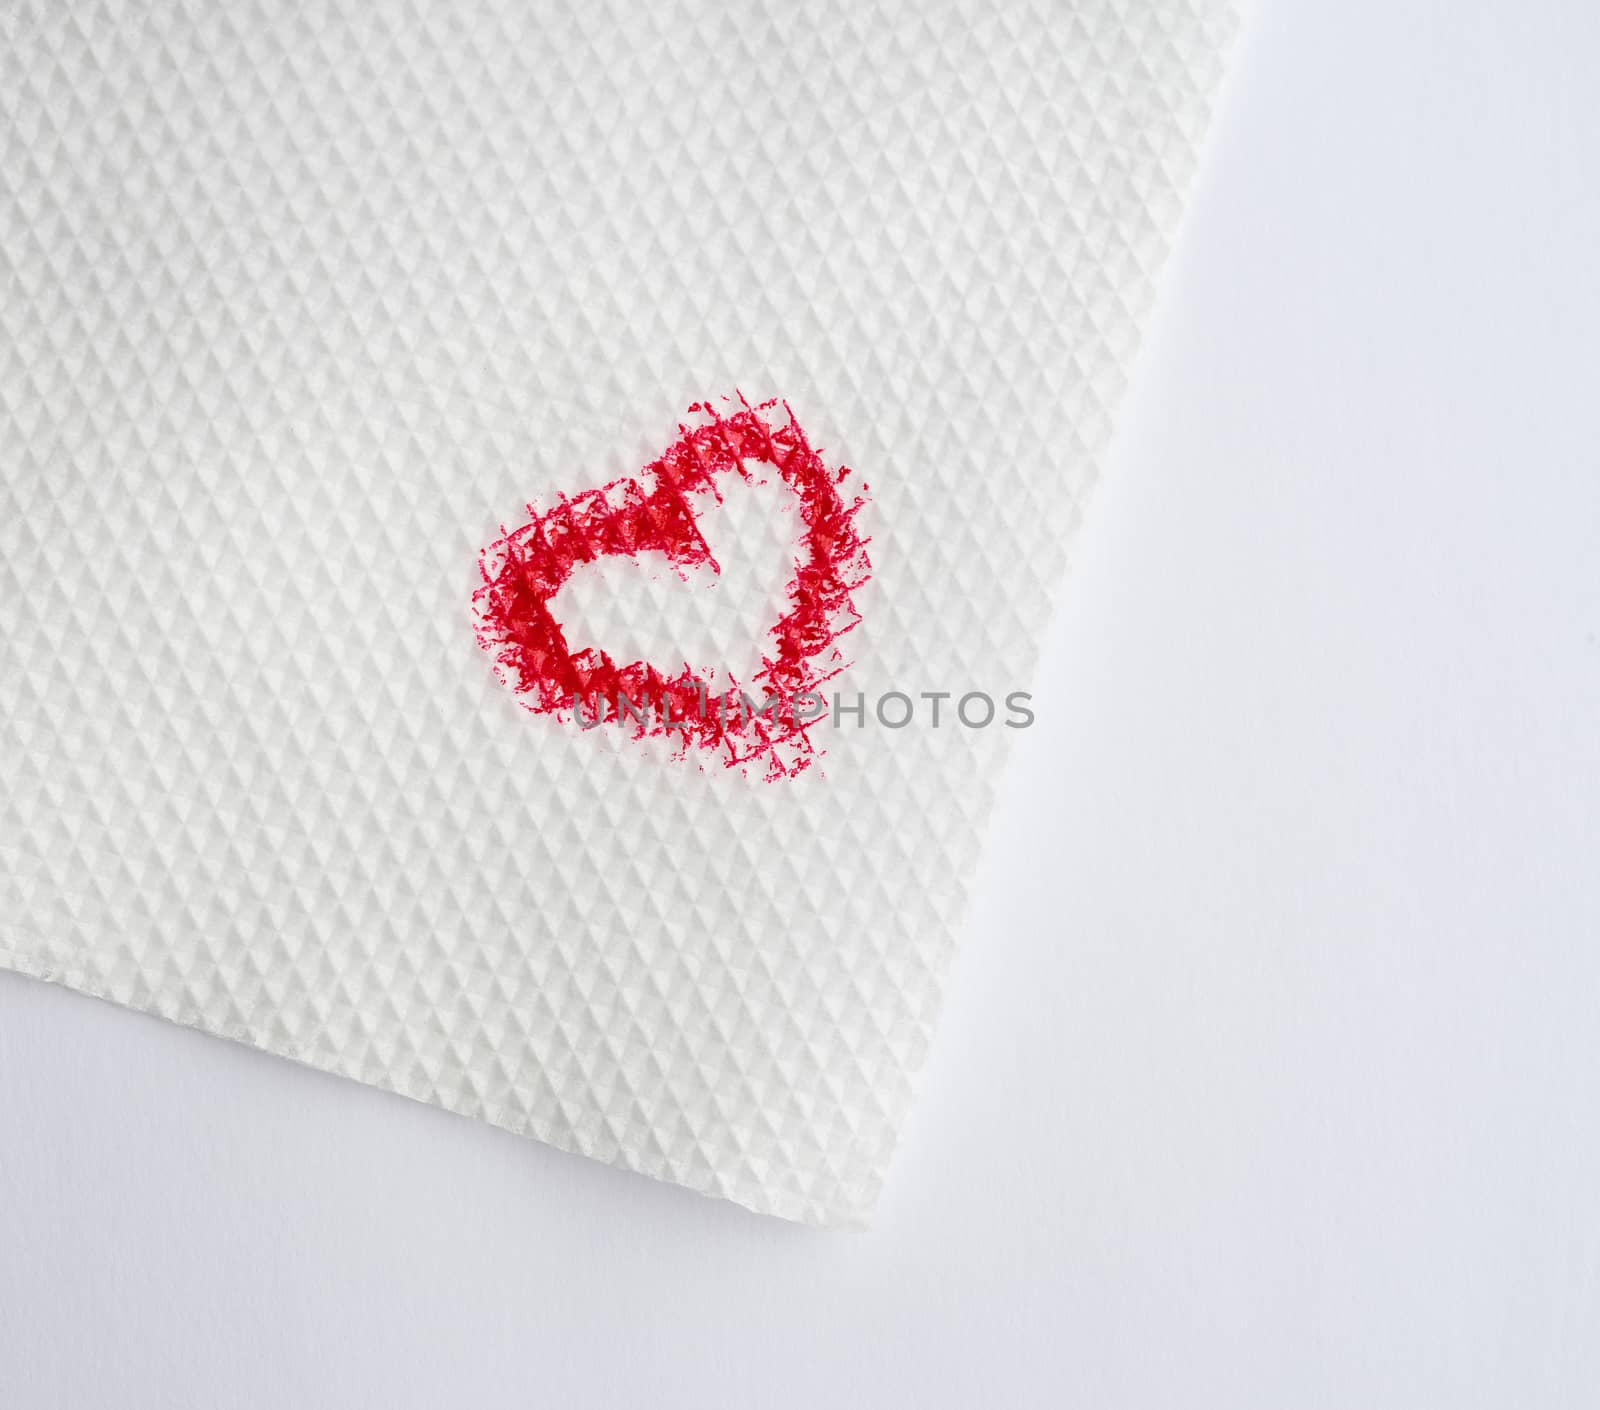 painted heart with red lipstick on a white paper napkin by ndanko